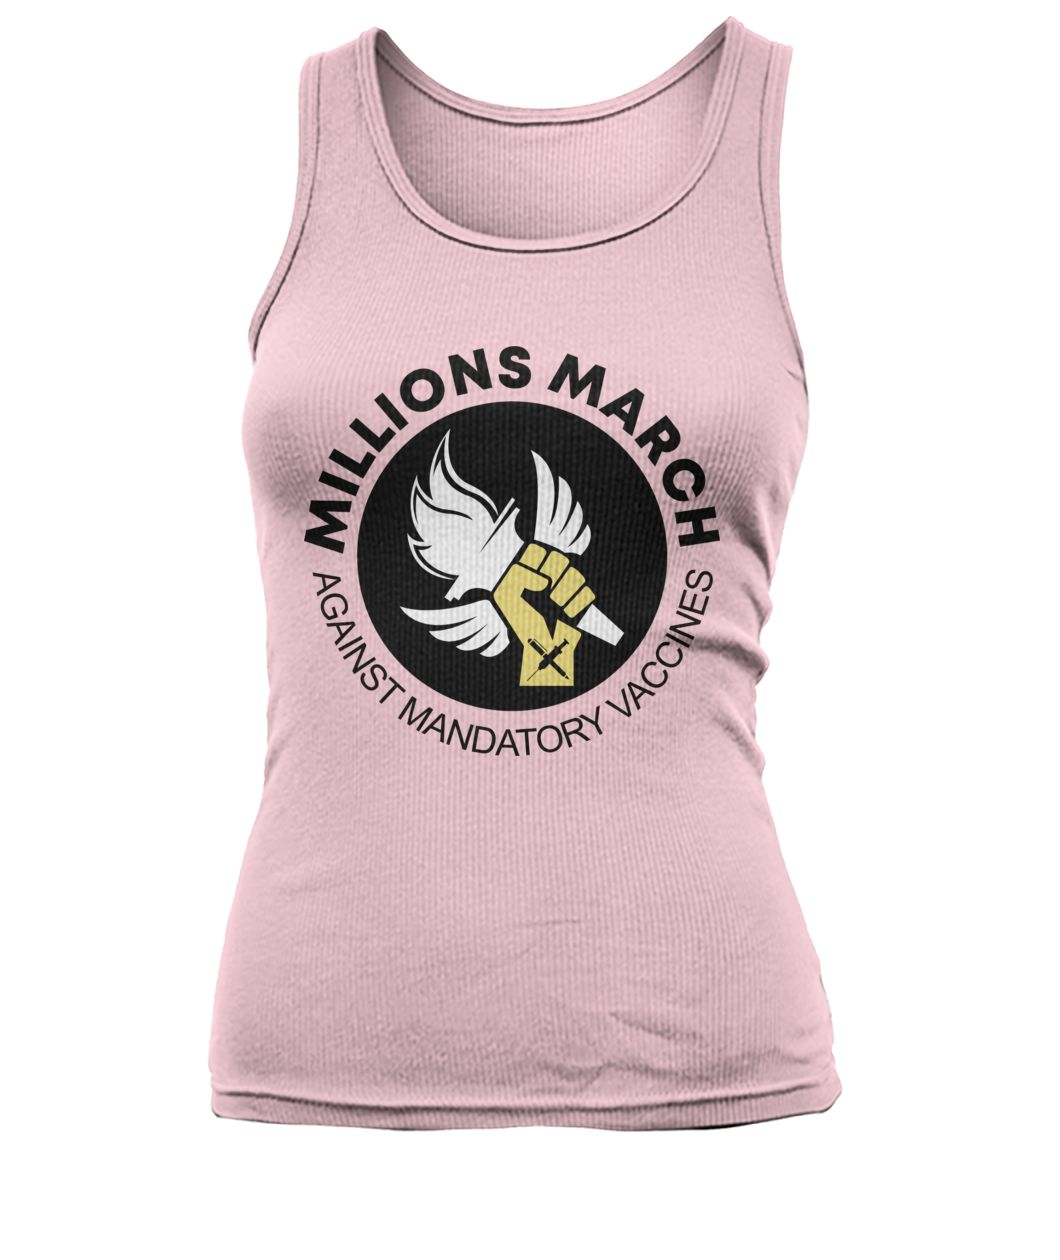 Millions march against mandatory vaccines women's tank top